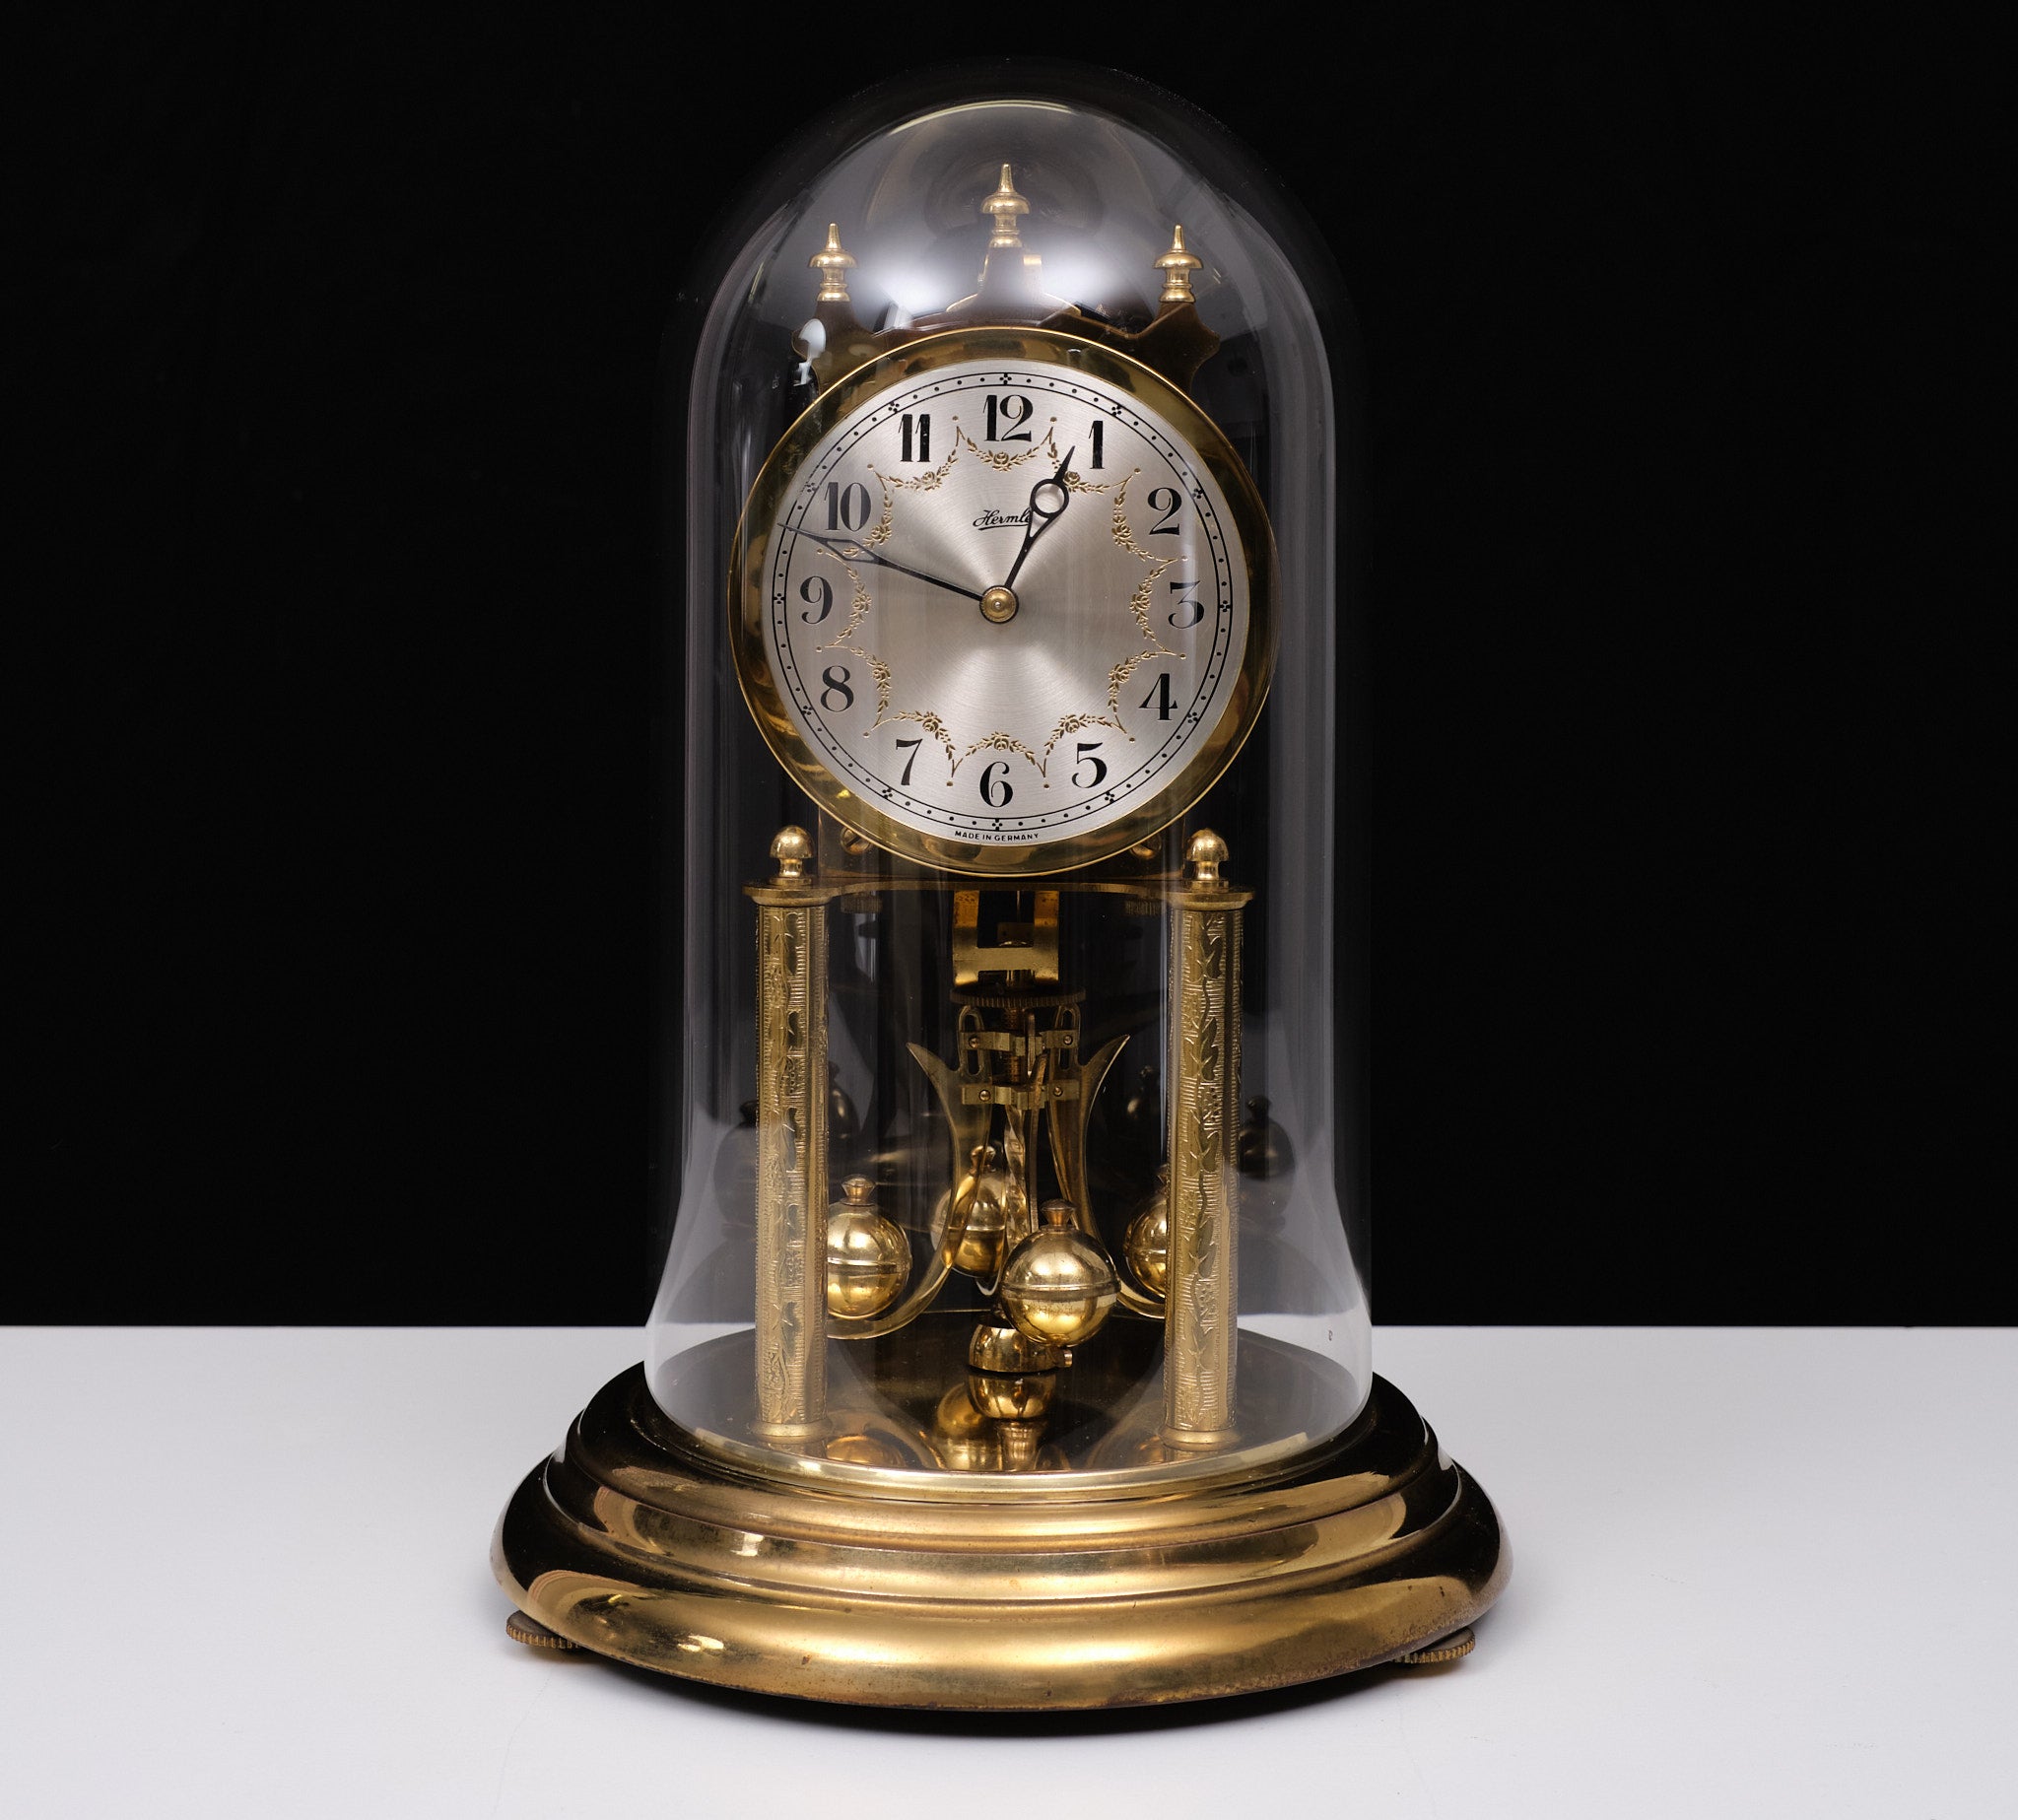 
Franz Hermle Anniversary Mantle Dome Clock
Model: FHS 921 001
This is a lovely wind up 400-day anniversary clock by Franz Hermle, a worldwide leader in the manufacturing of clocks and mechanical clock movements. It is in good condition, with no